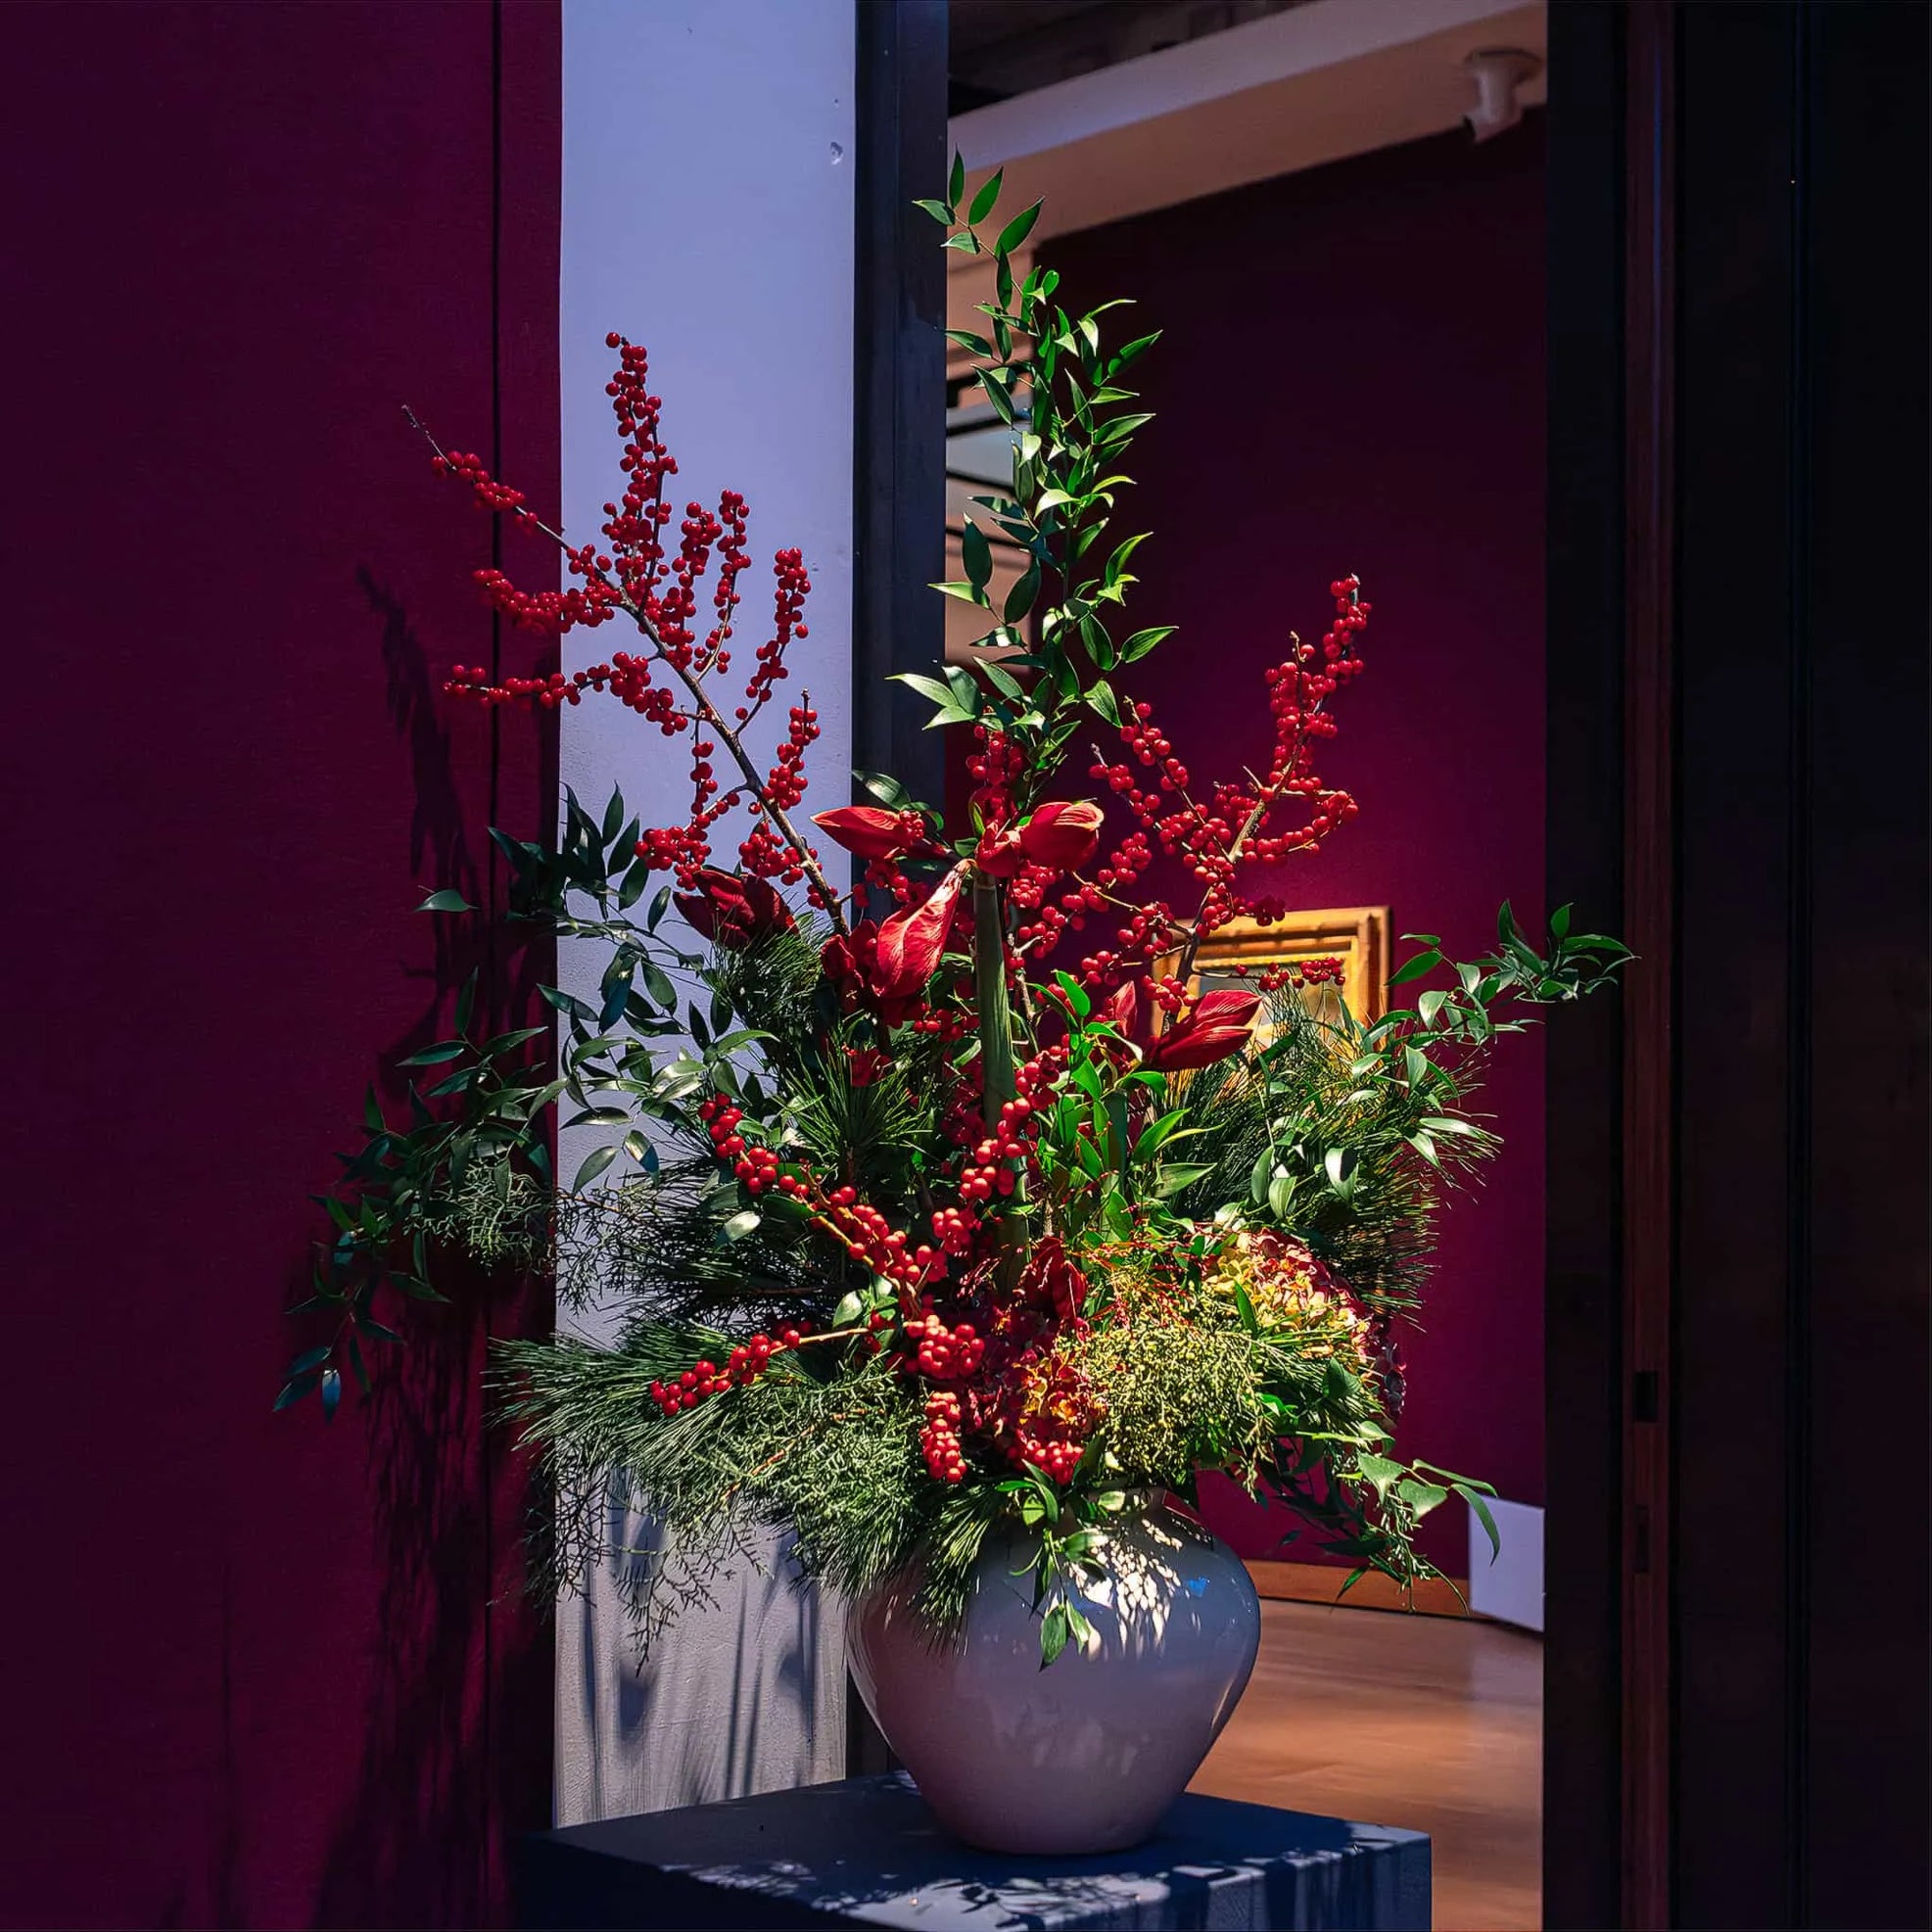 A regal purple vase cradles a festive bouquet with deep reds and bright greens for a luxurious bespoke Christmas bouquet at Christie's by Amaranté London